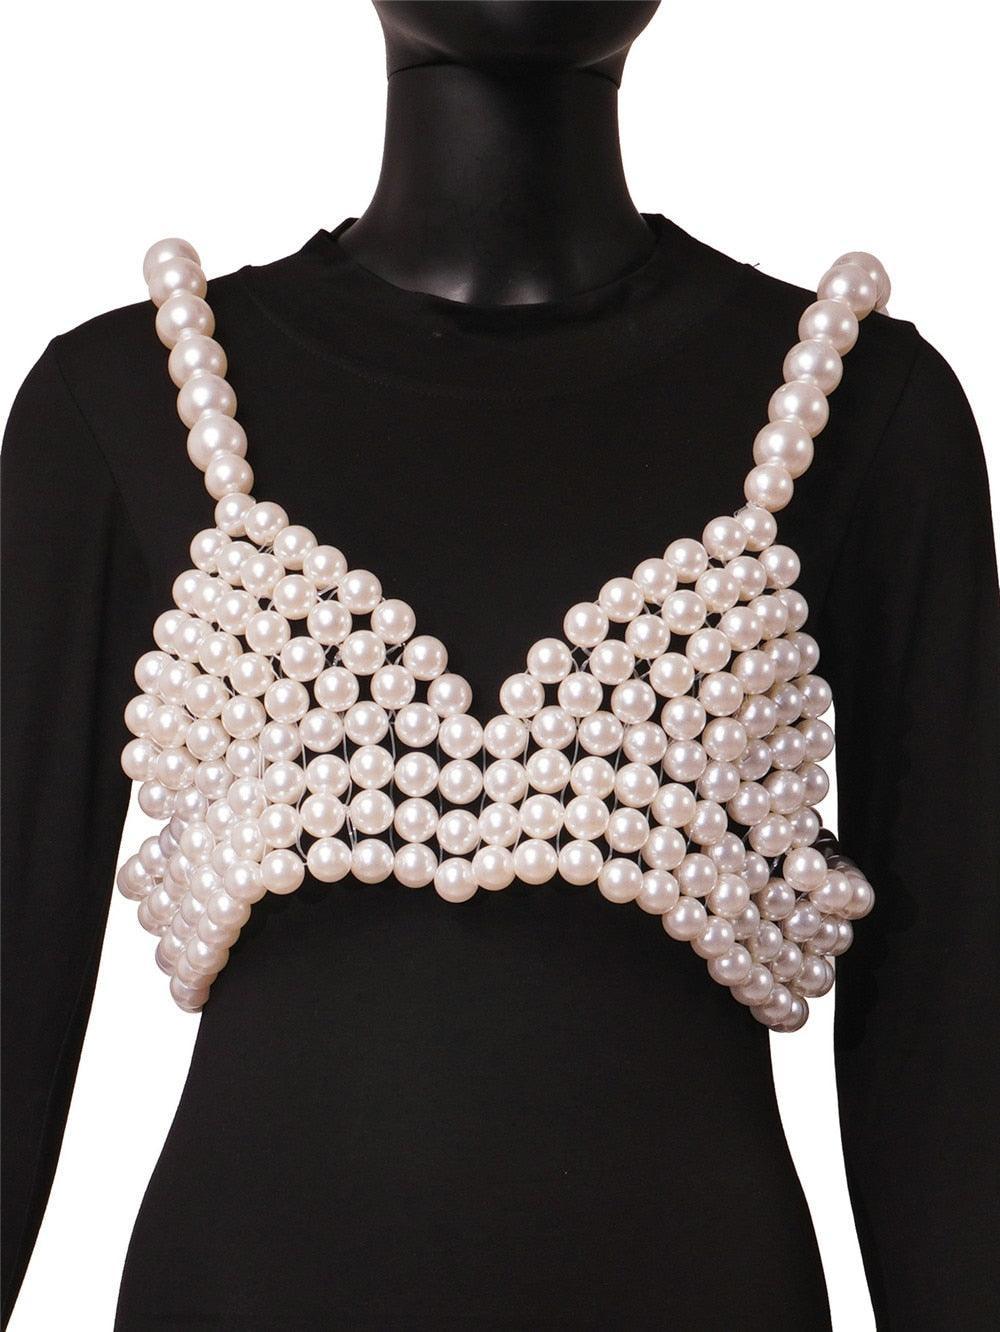 Tammy Pearl Beads Crop Top from The House of CO-KY - Shirts & Tops